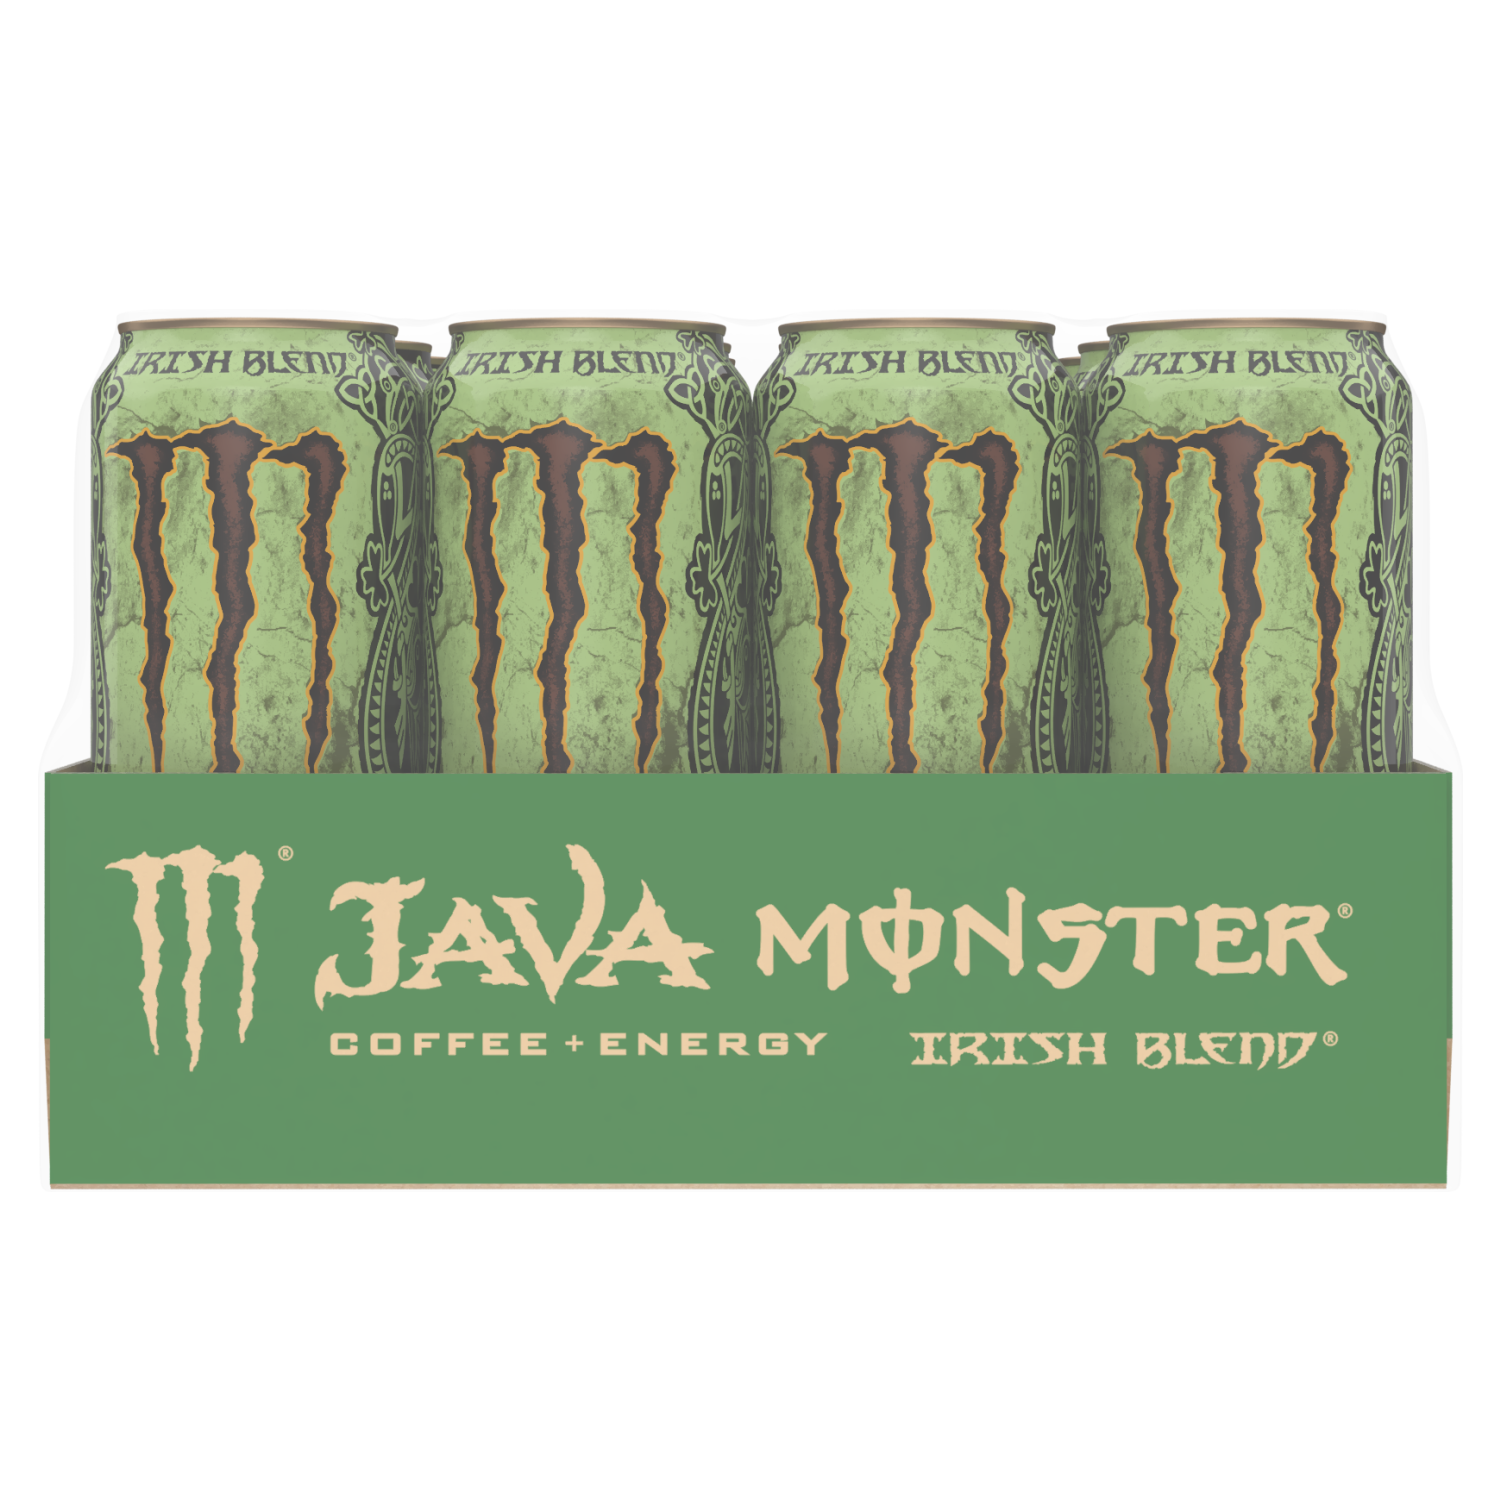 slide 5 of 5, Monster Energy The good news is everyone loves Java Monster and it's selling like crazy. But we can't make enough to keep up with demand. So, we found a European source and shipped them our premium brew to make the same great tasting product. Don't freak when you see this bright gold top on your favorite flavor… it's our Euro version. Java Monster – still made with premium coffee and cream, brewed with the same killer flavor and supercharged with the Monster Energy Blend., 15 oz